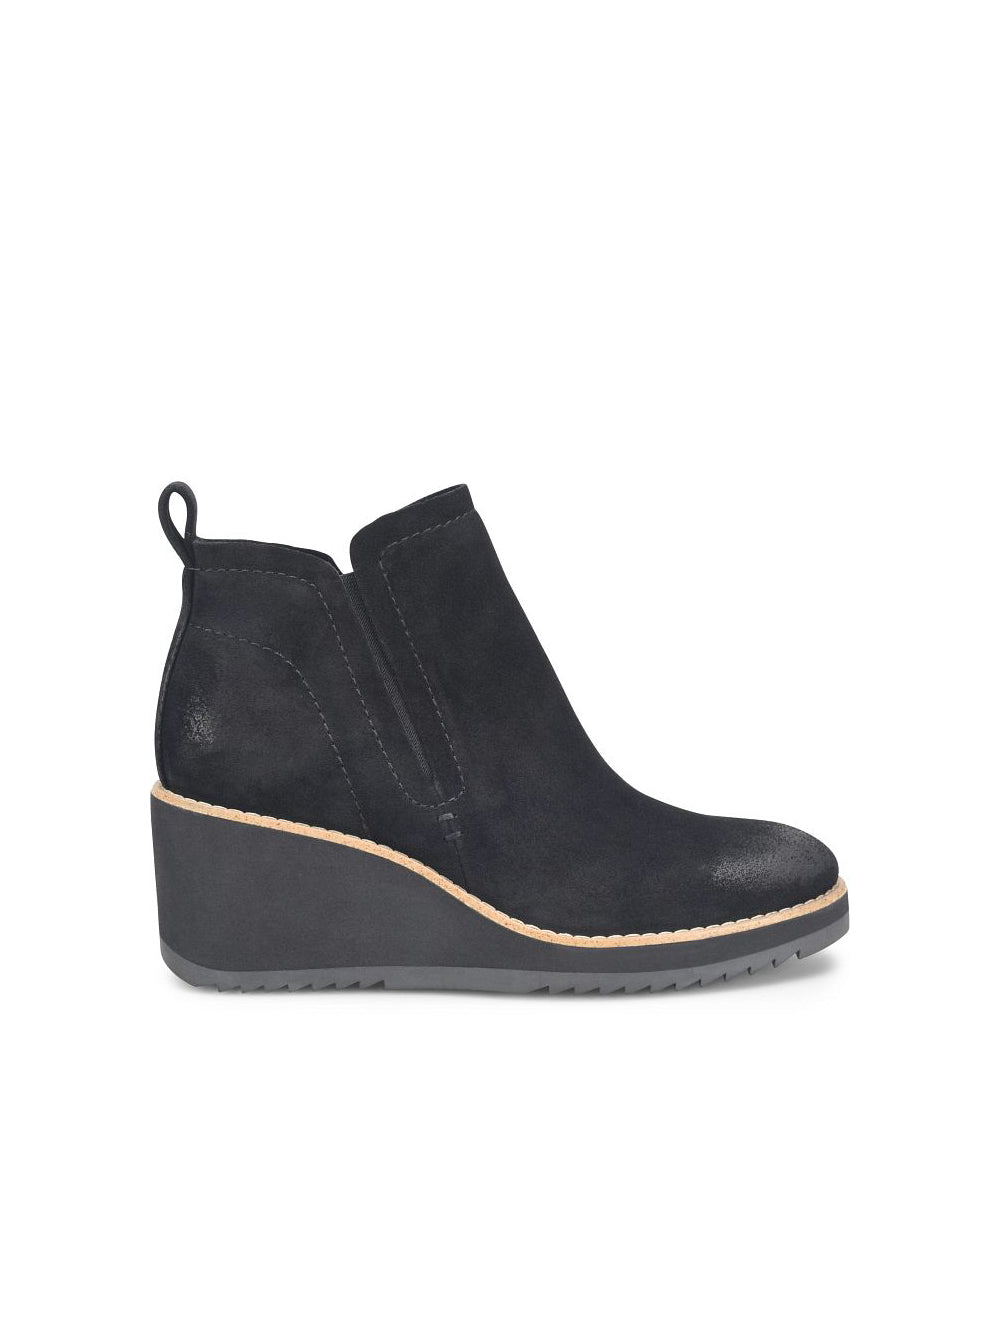 sofft shoes emeree wedge chelsea ankle boot in black suede